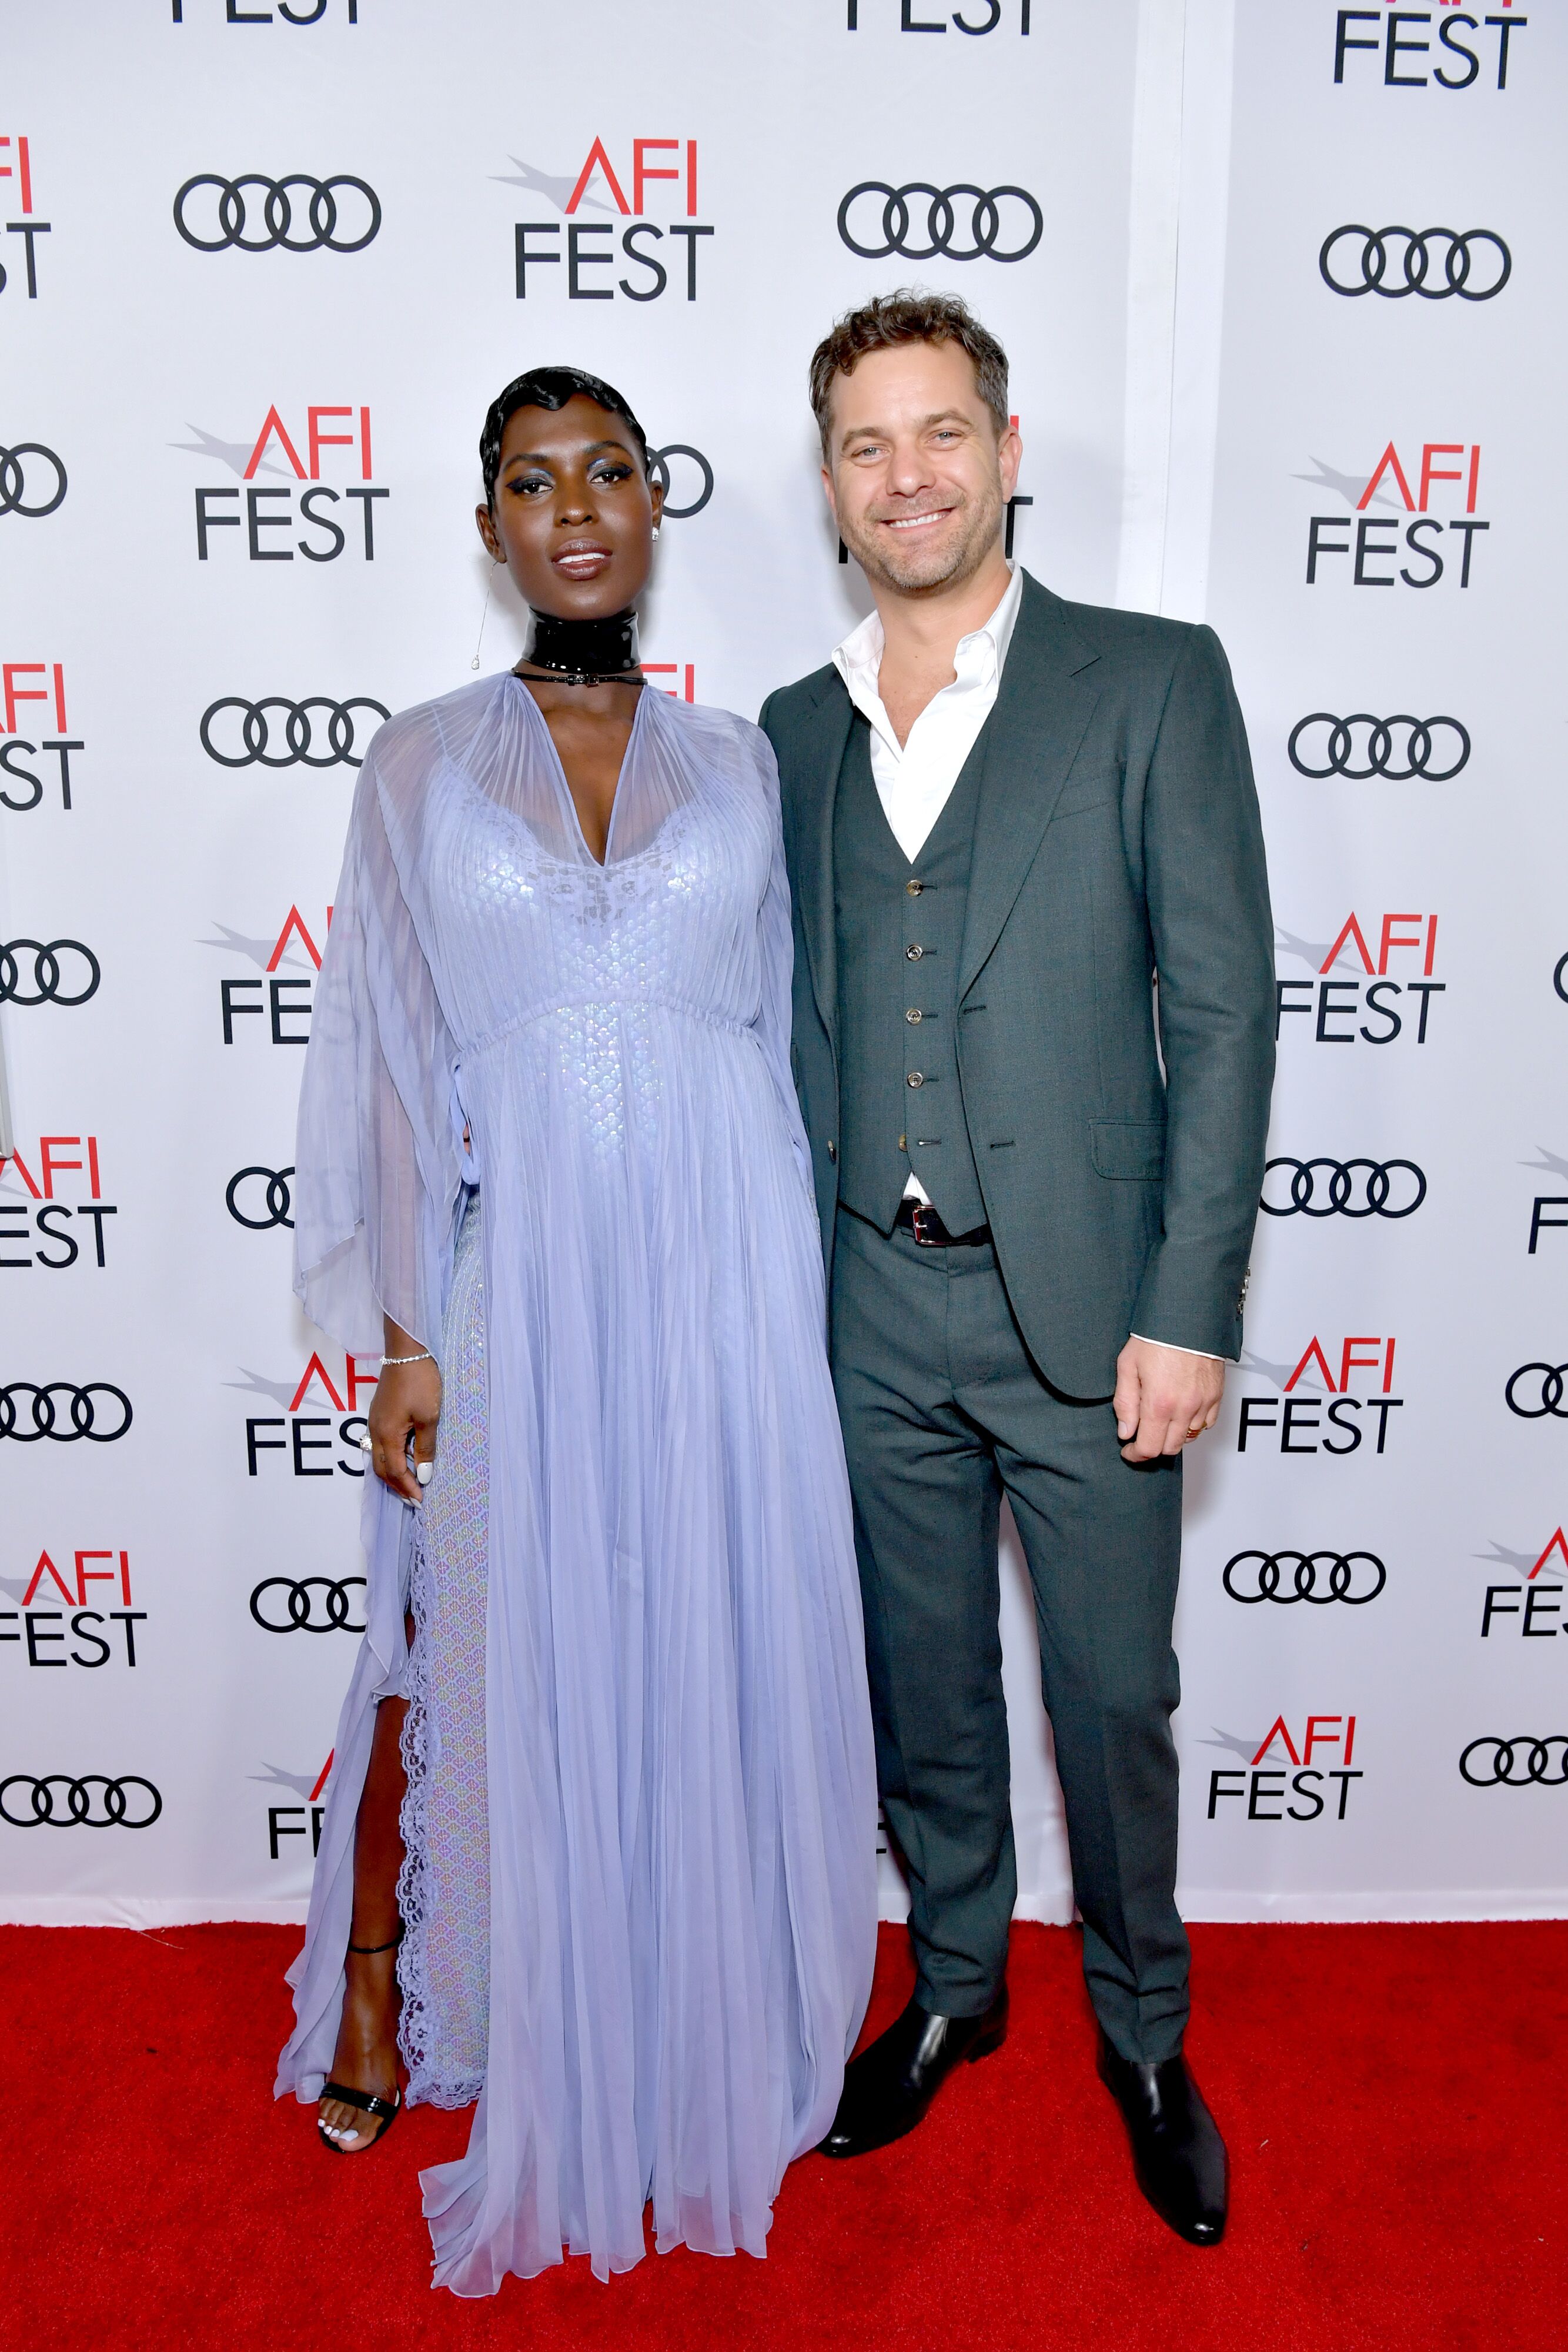 Jodie Turner-Smith and Joshua Jackson attend the "Queen & Slim" Premiere at AFI FEST 2019 presented by Audi at the TCL Chinese Theatre on November 14, 2019 in Hollywood, California. | Source: Getty Images